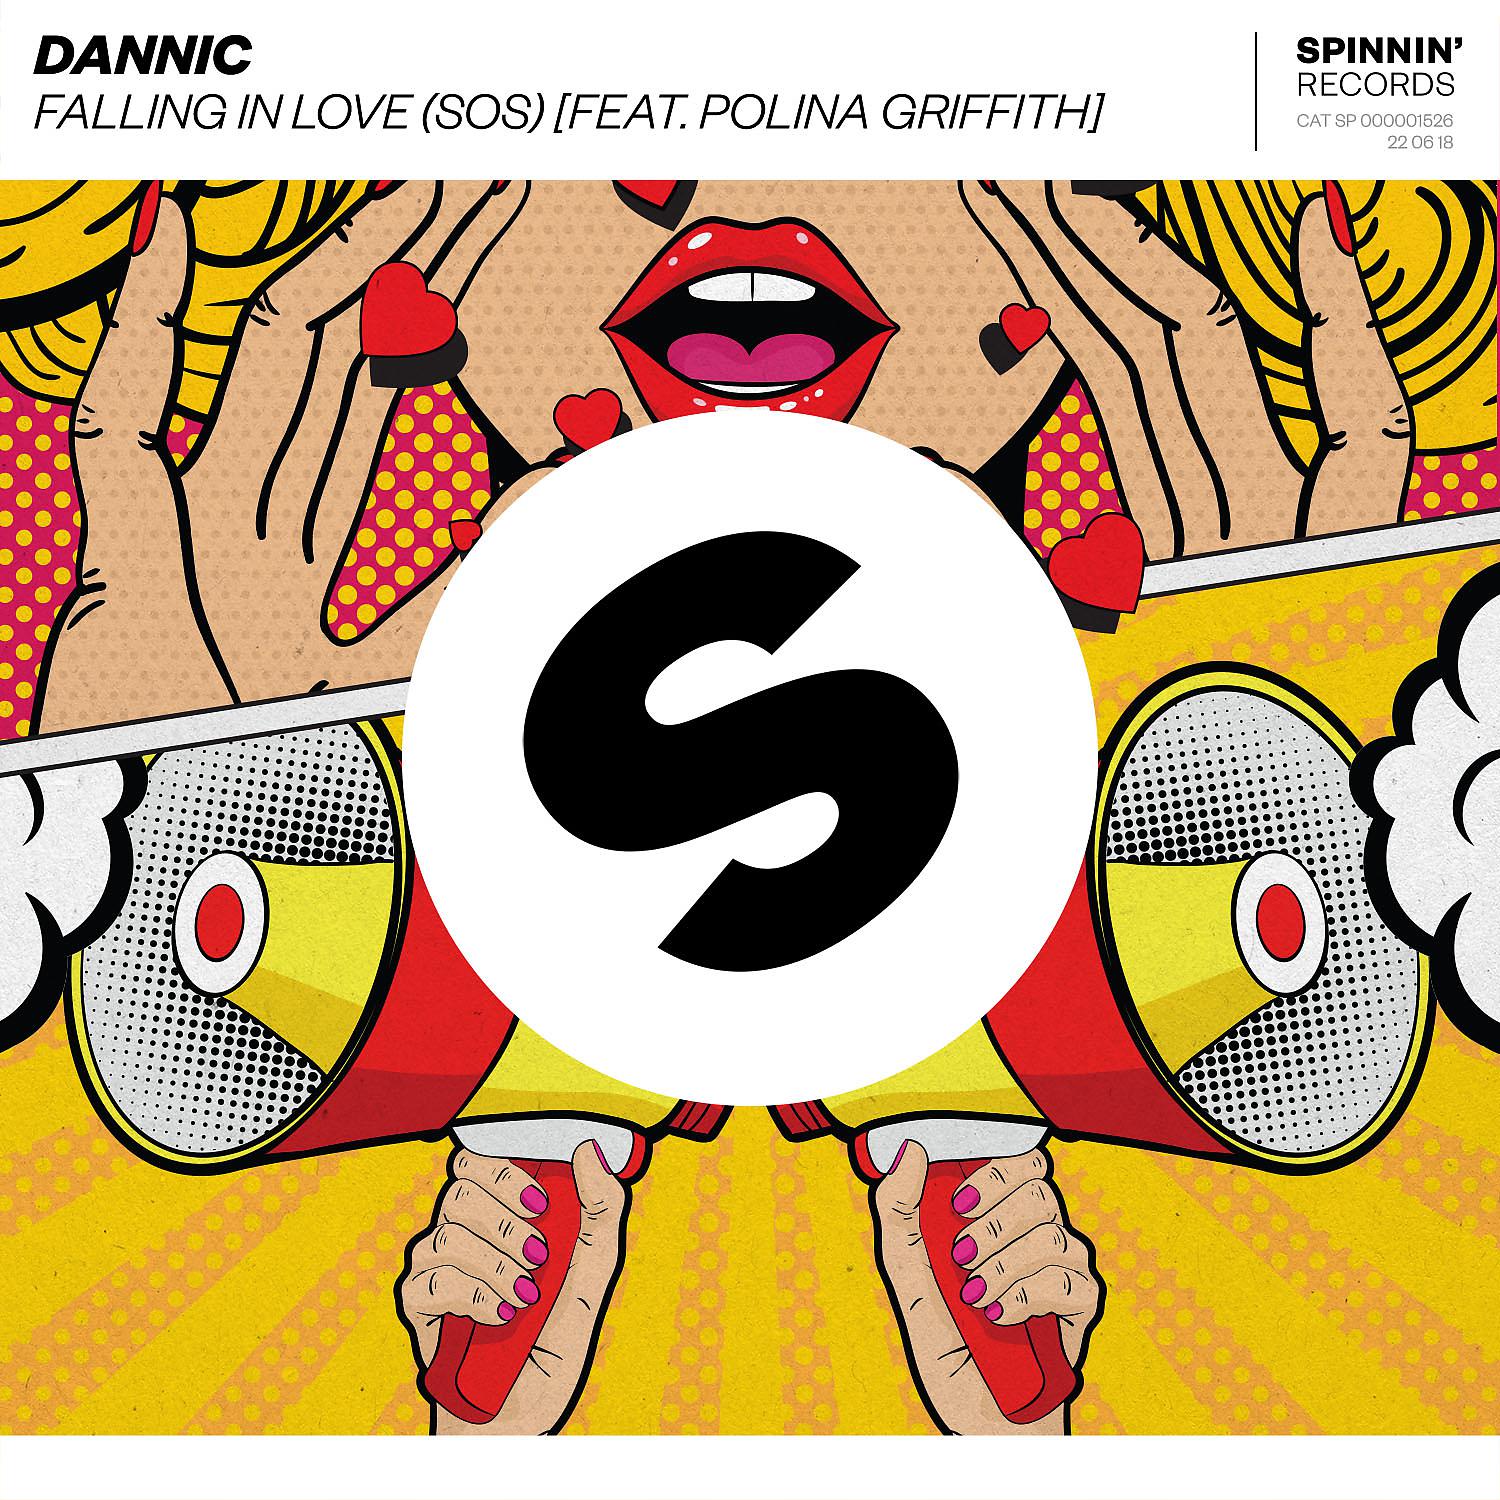 Лове сос. Spinnin records Love. Dannic feat. Polina Griffith - Falling in Love (Extended Mix). Dannic - Falling in Love (SOS). Ralph good feat. Polina Griffith - SOS.